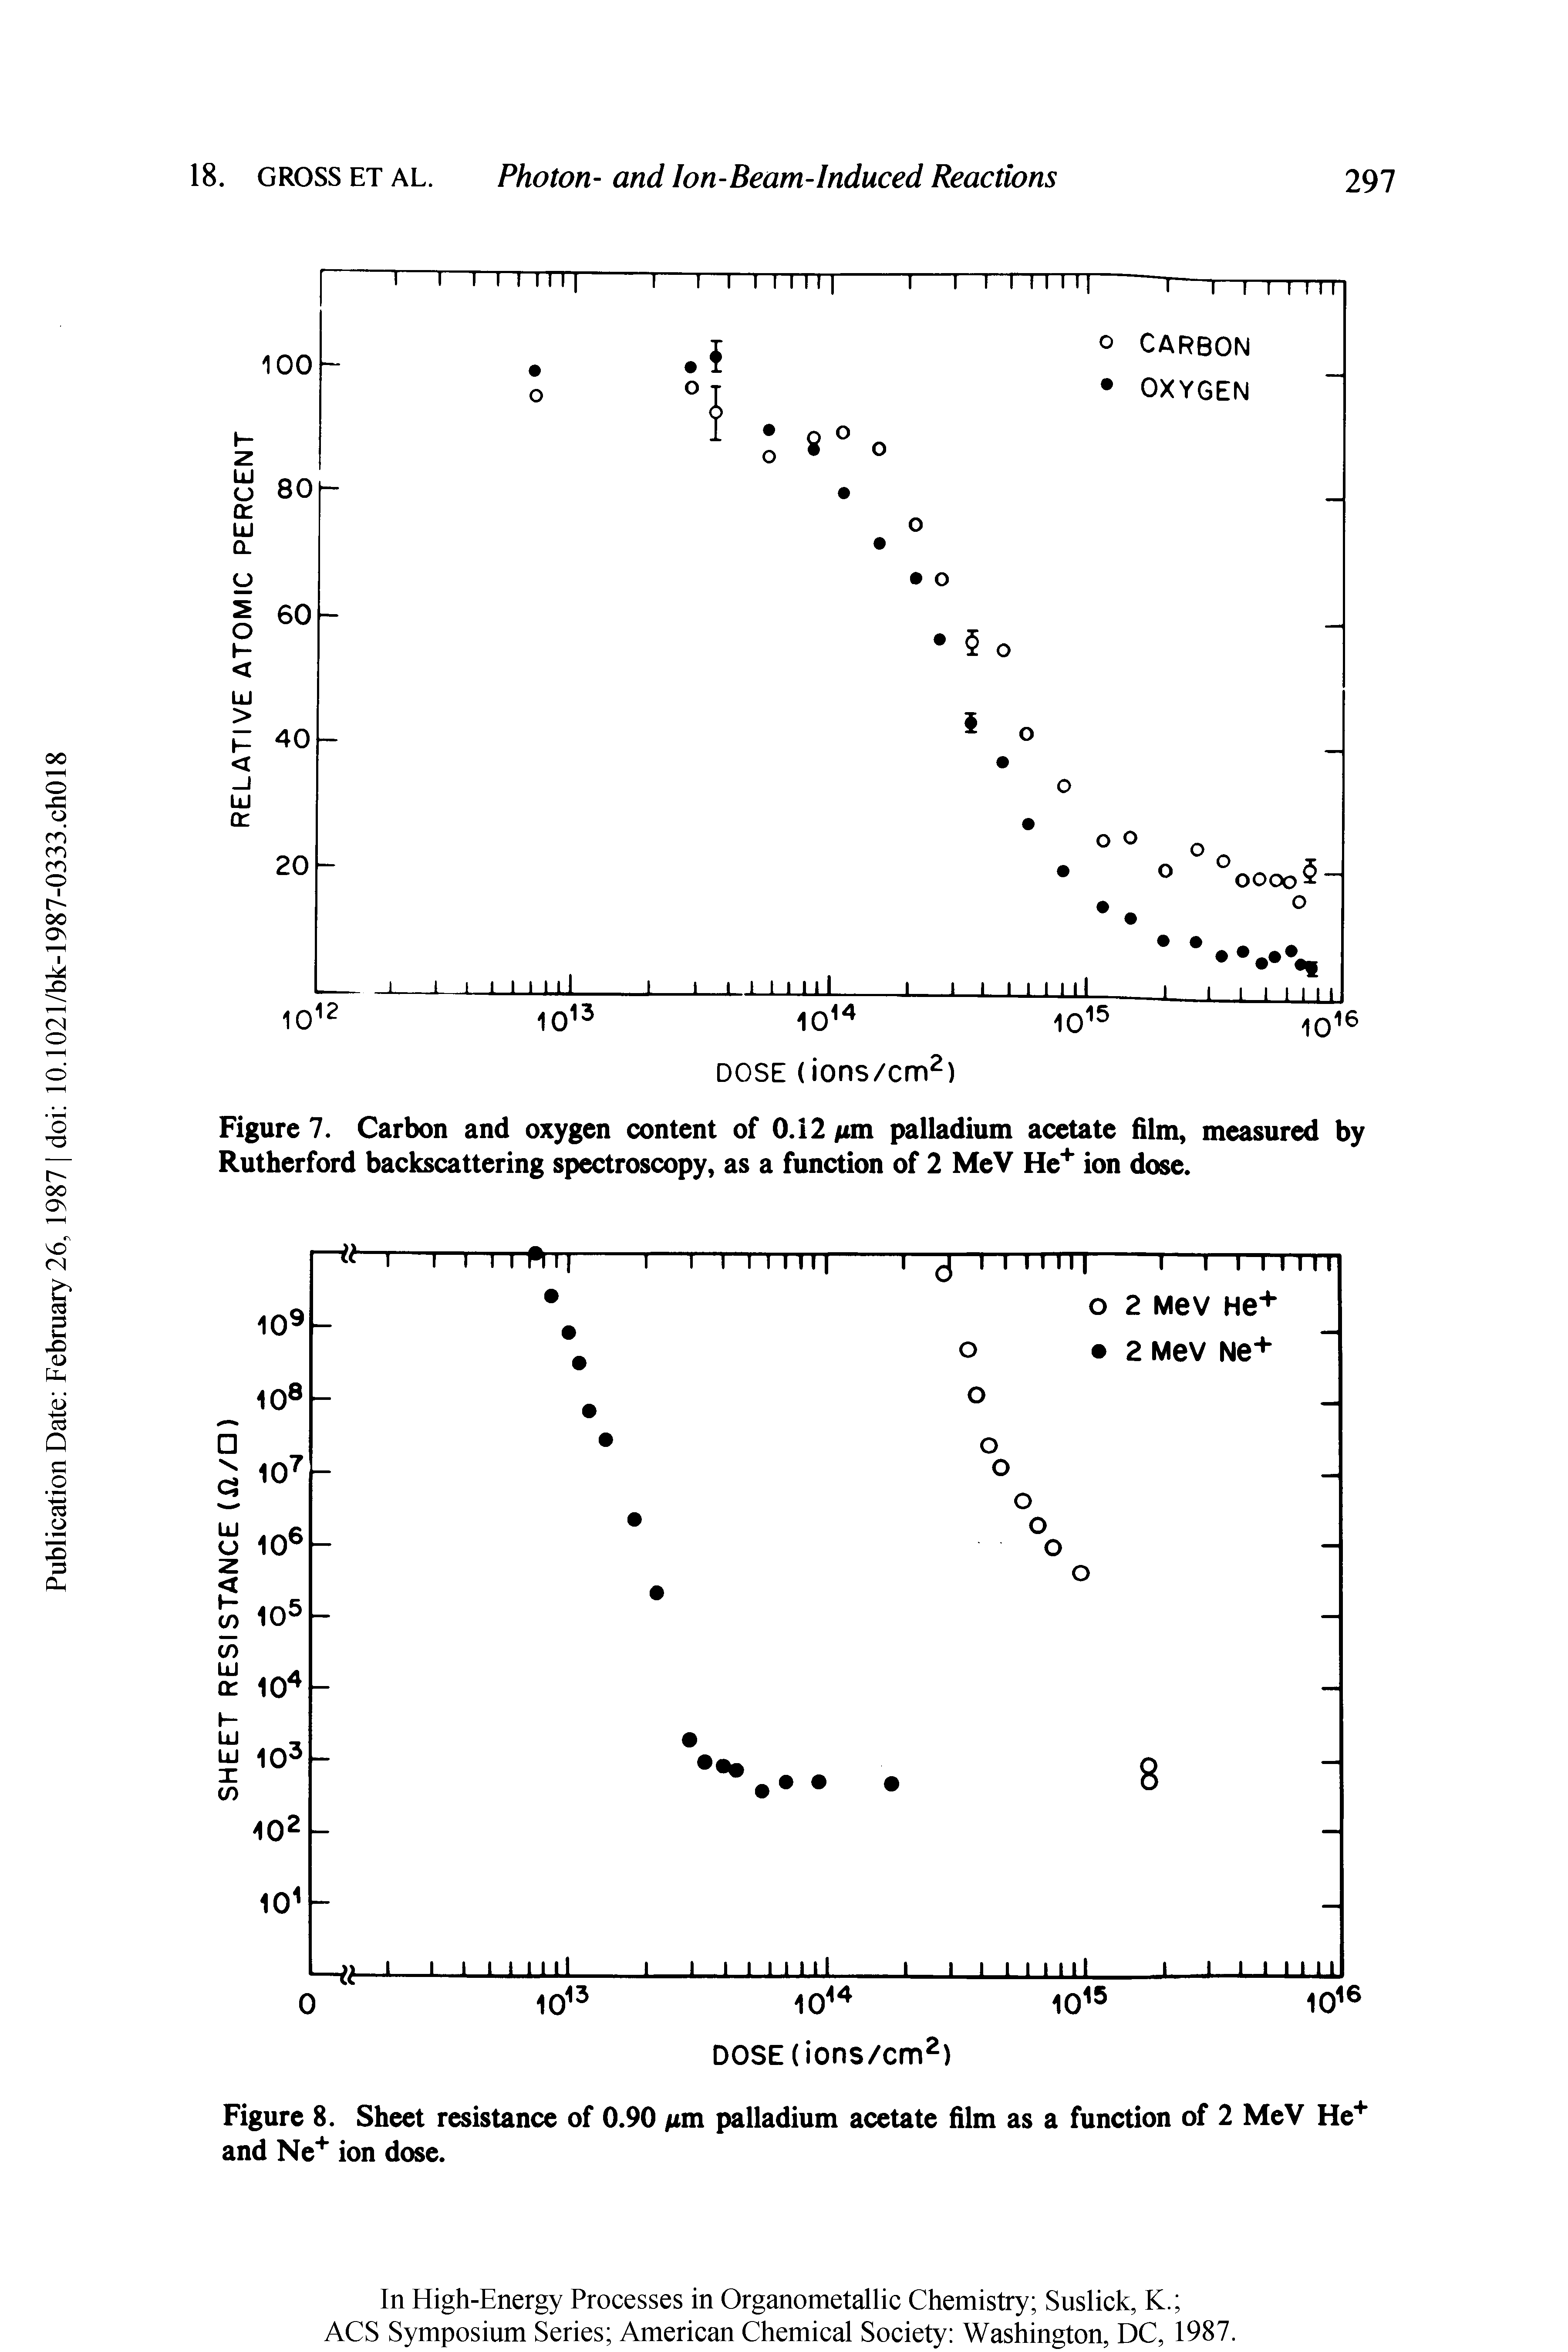 Figure 7. Carbon and oxygen content of 0.12 nm palladium acetate film, measured by Rutherford backscattering spectroscopy, as a function of 2 MeV He+ ion dose.